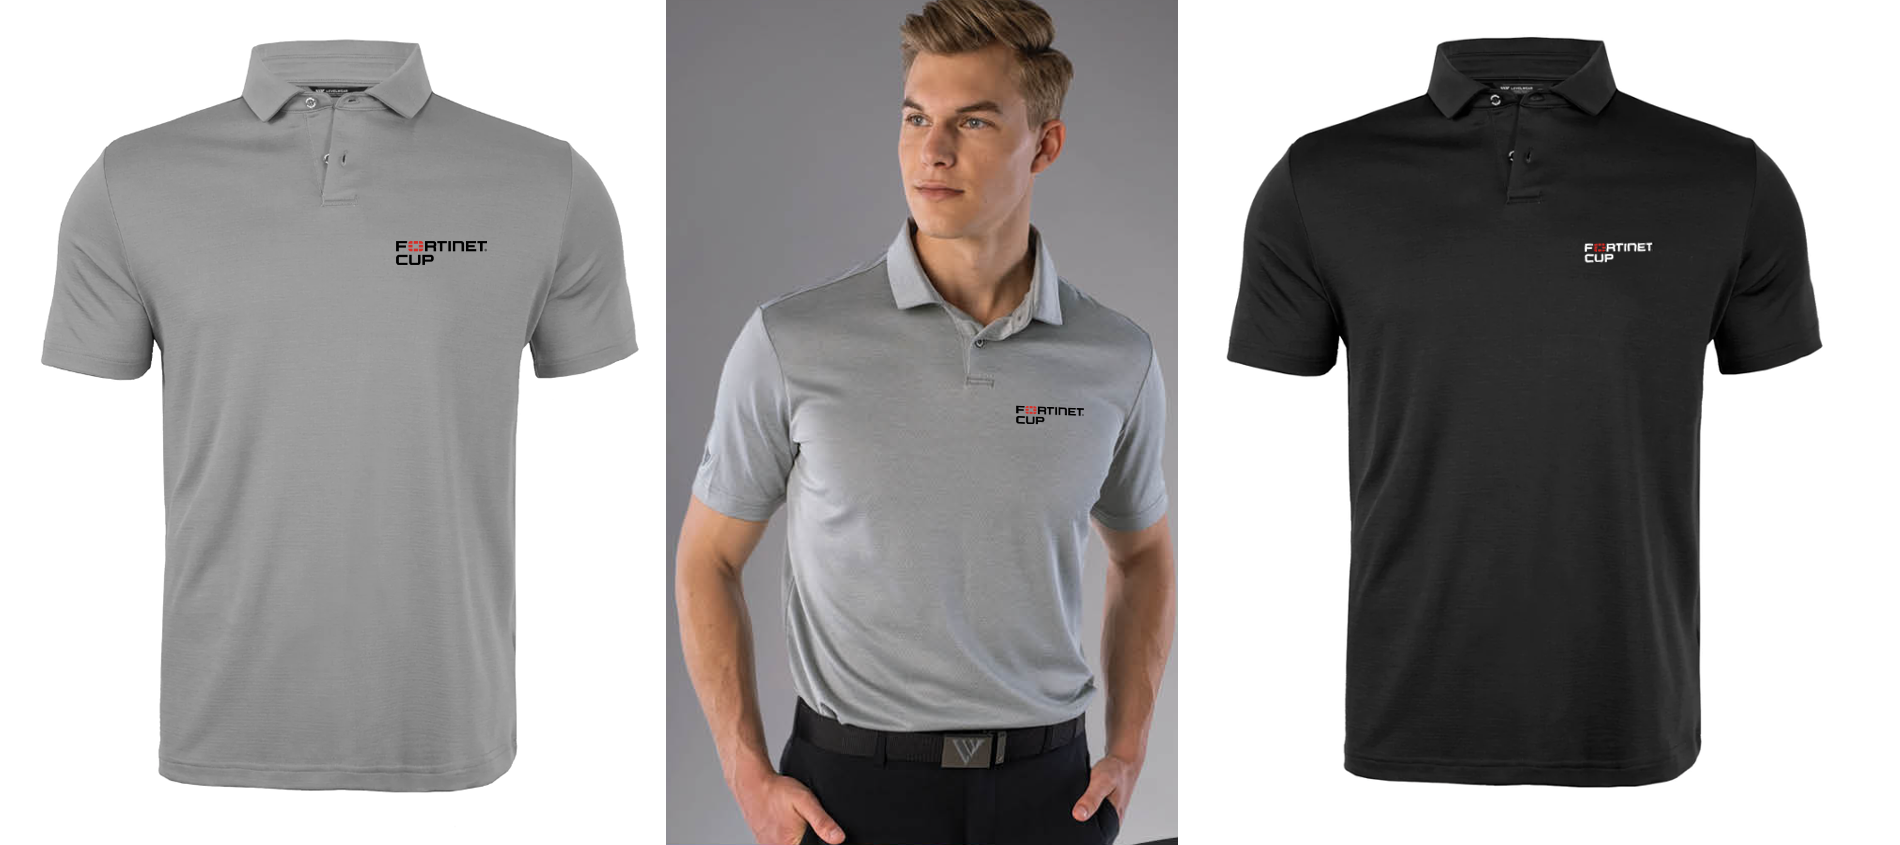 Fortinet Cup Levelwear Men's Performance Polo